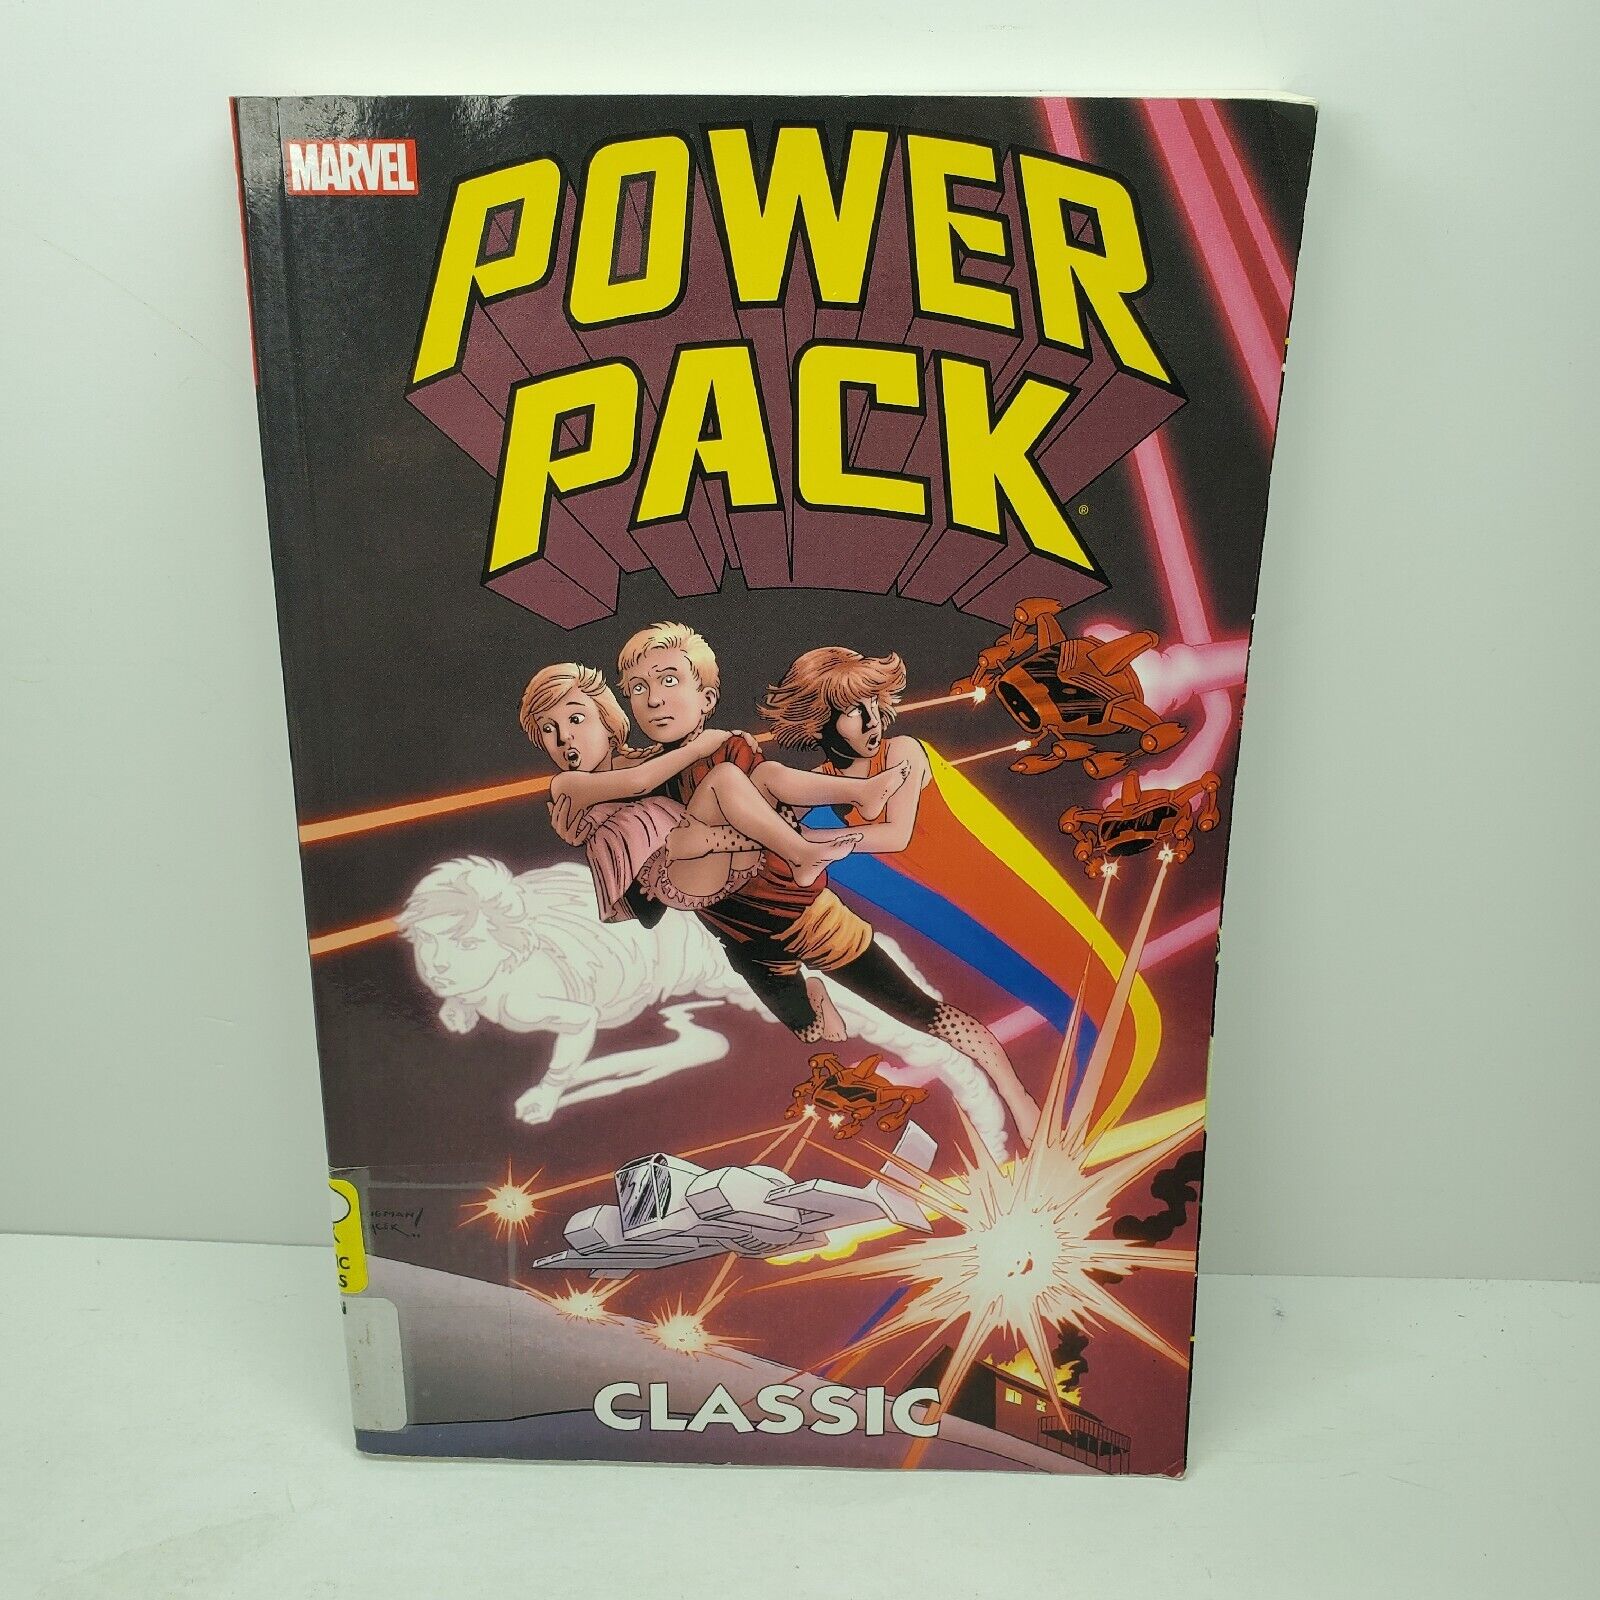 POWER PACK CLASSIC VOL. 1 Paperback – Illustrated - Ex Library